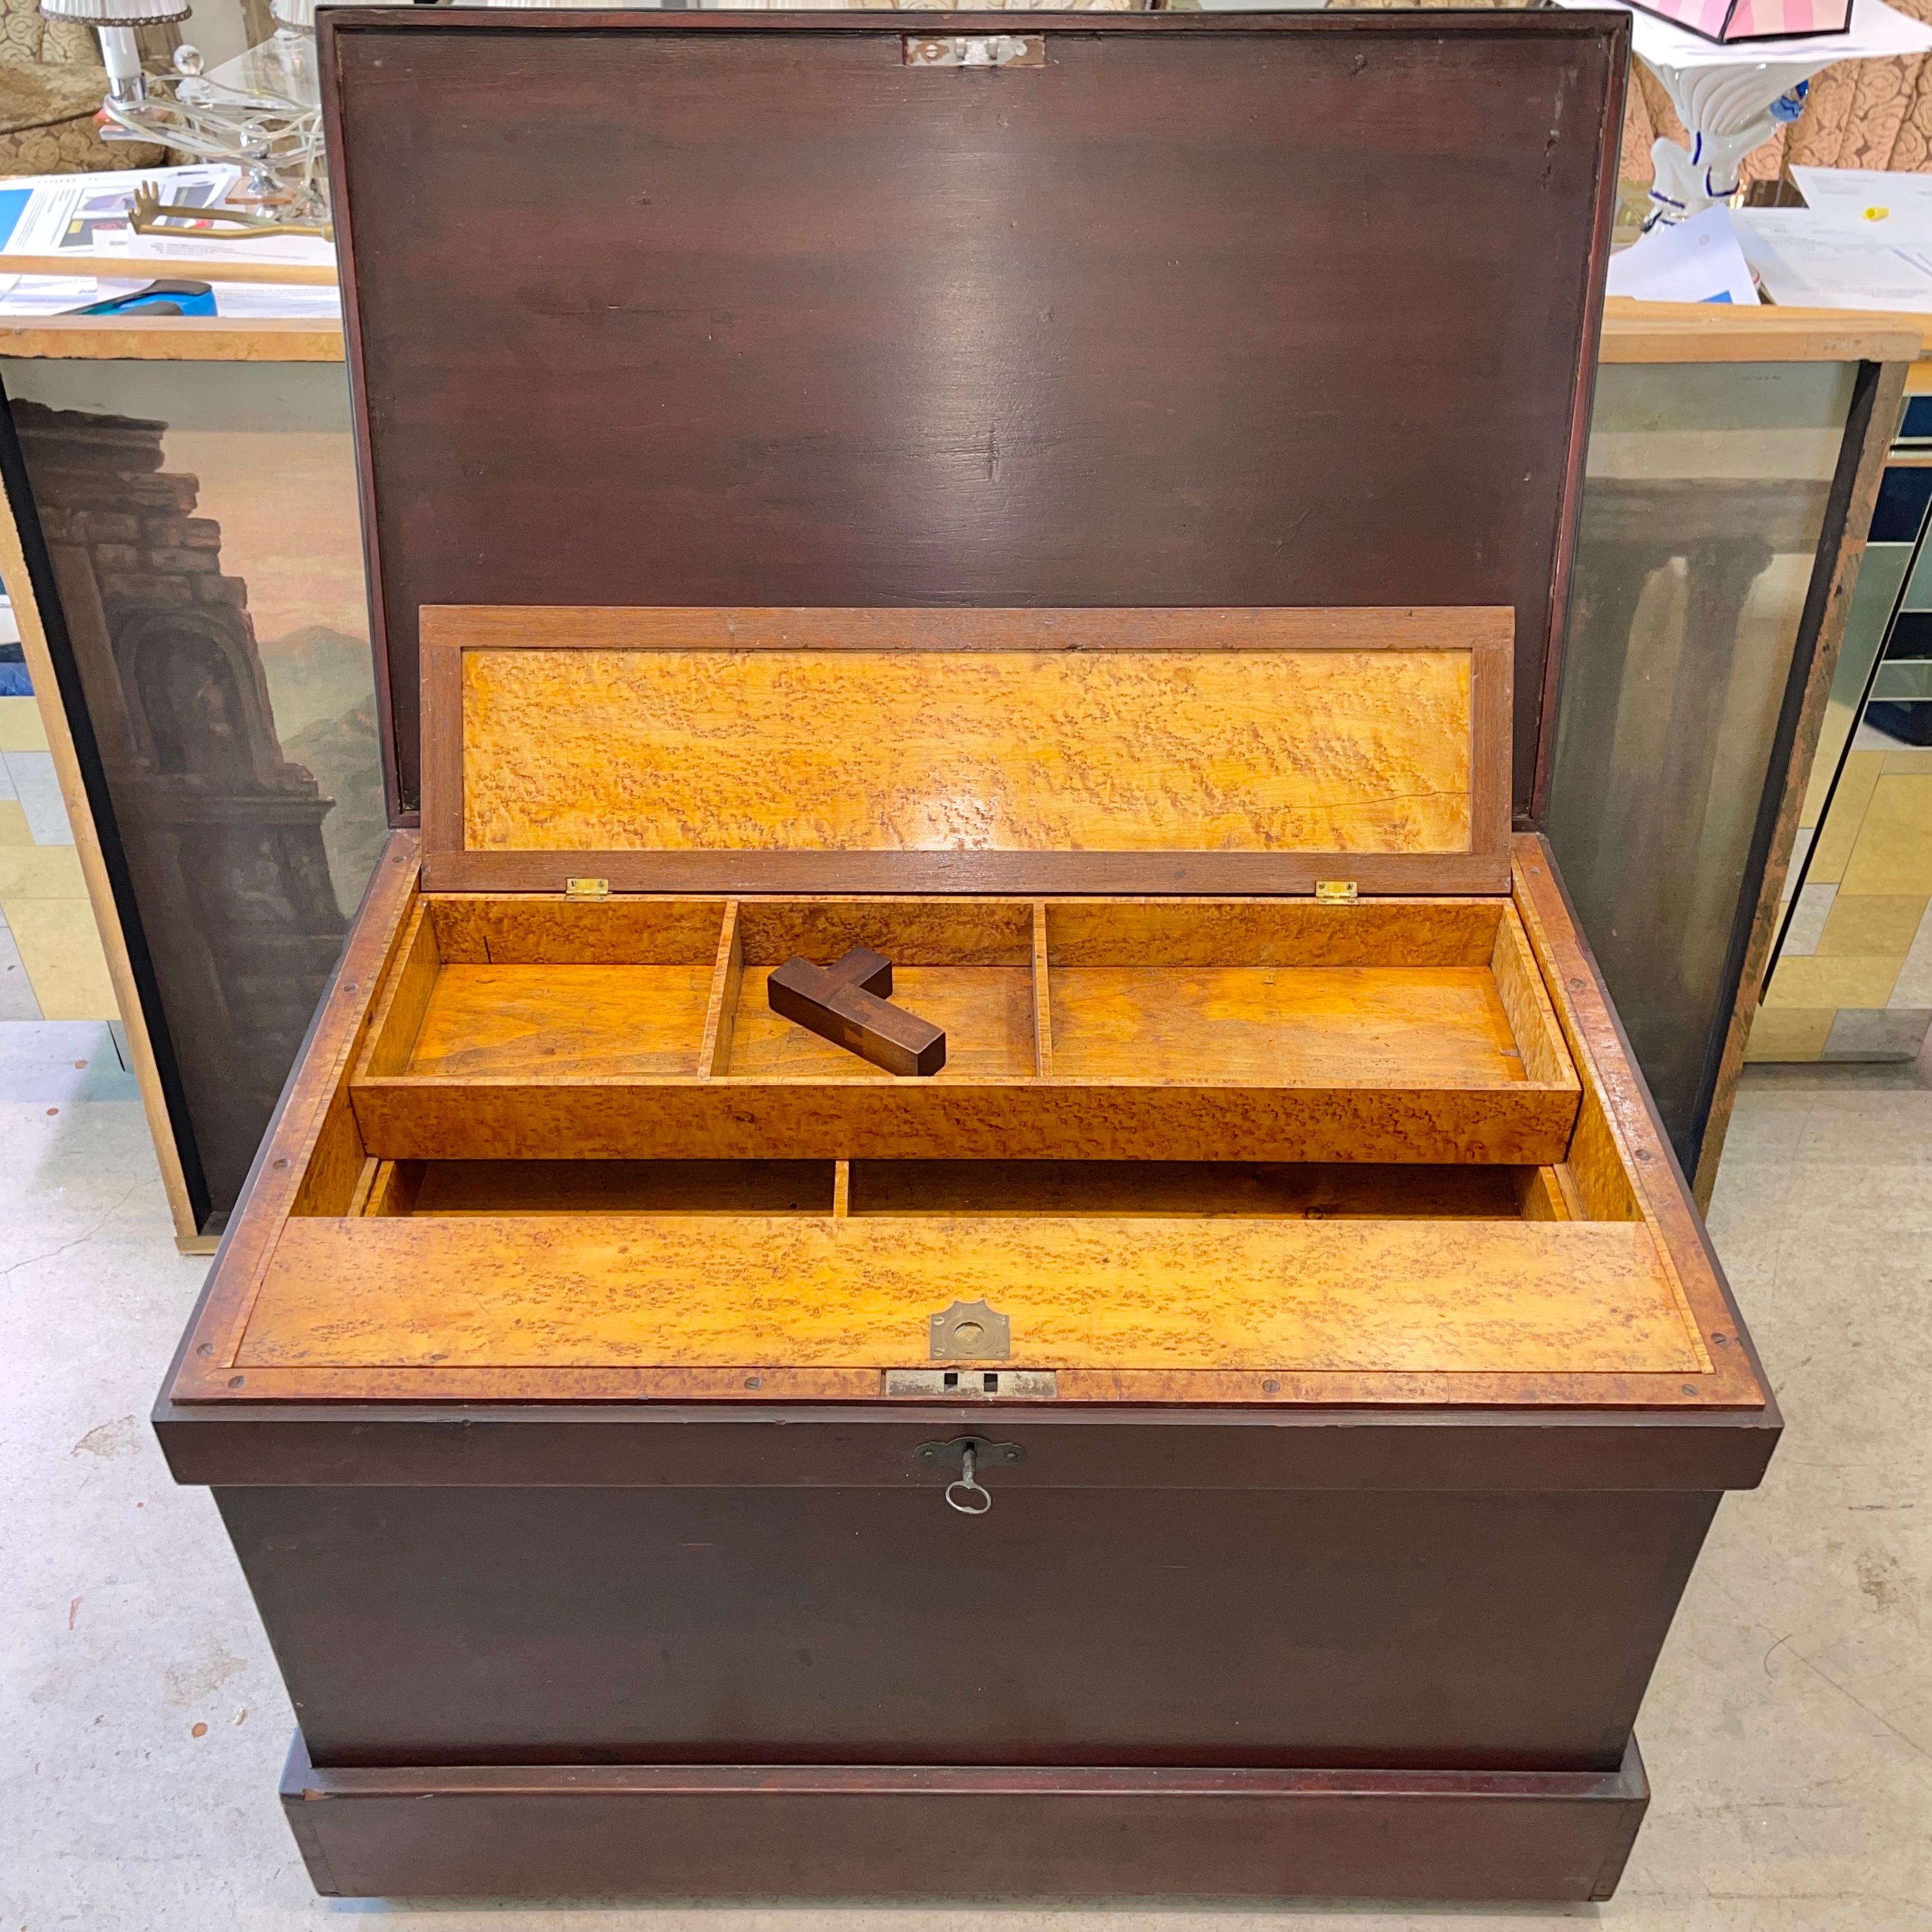 Finely crafted mid-Victorian carpenters tool chest, dovetailed construction, mahogany stained pine, forged steel banding around lidded top which when unlocked opens to reveal a fitted interior of birds eye maple with walnut trim. Two tills of